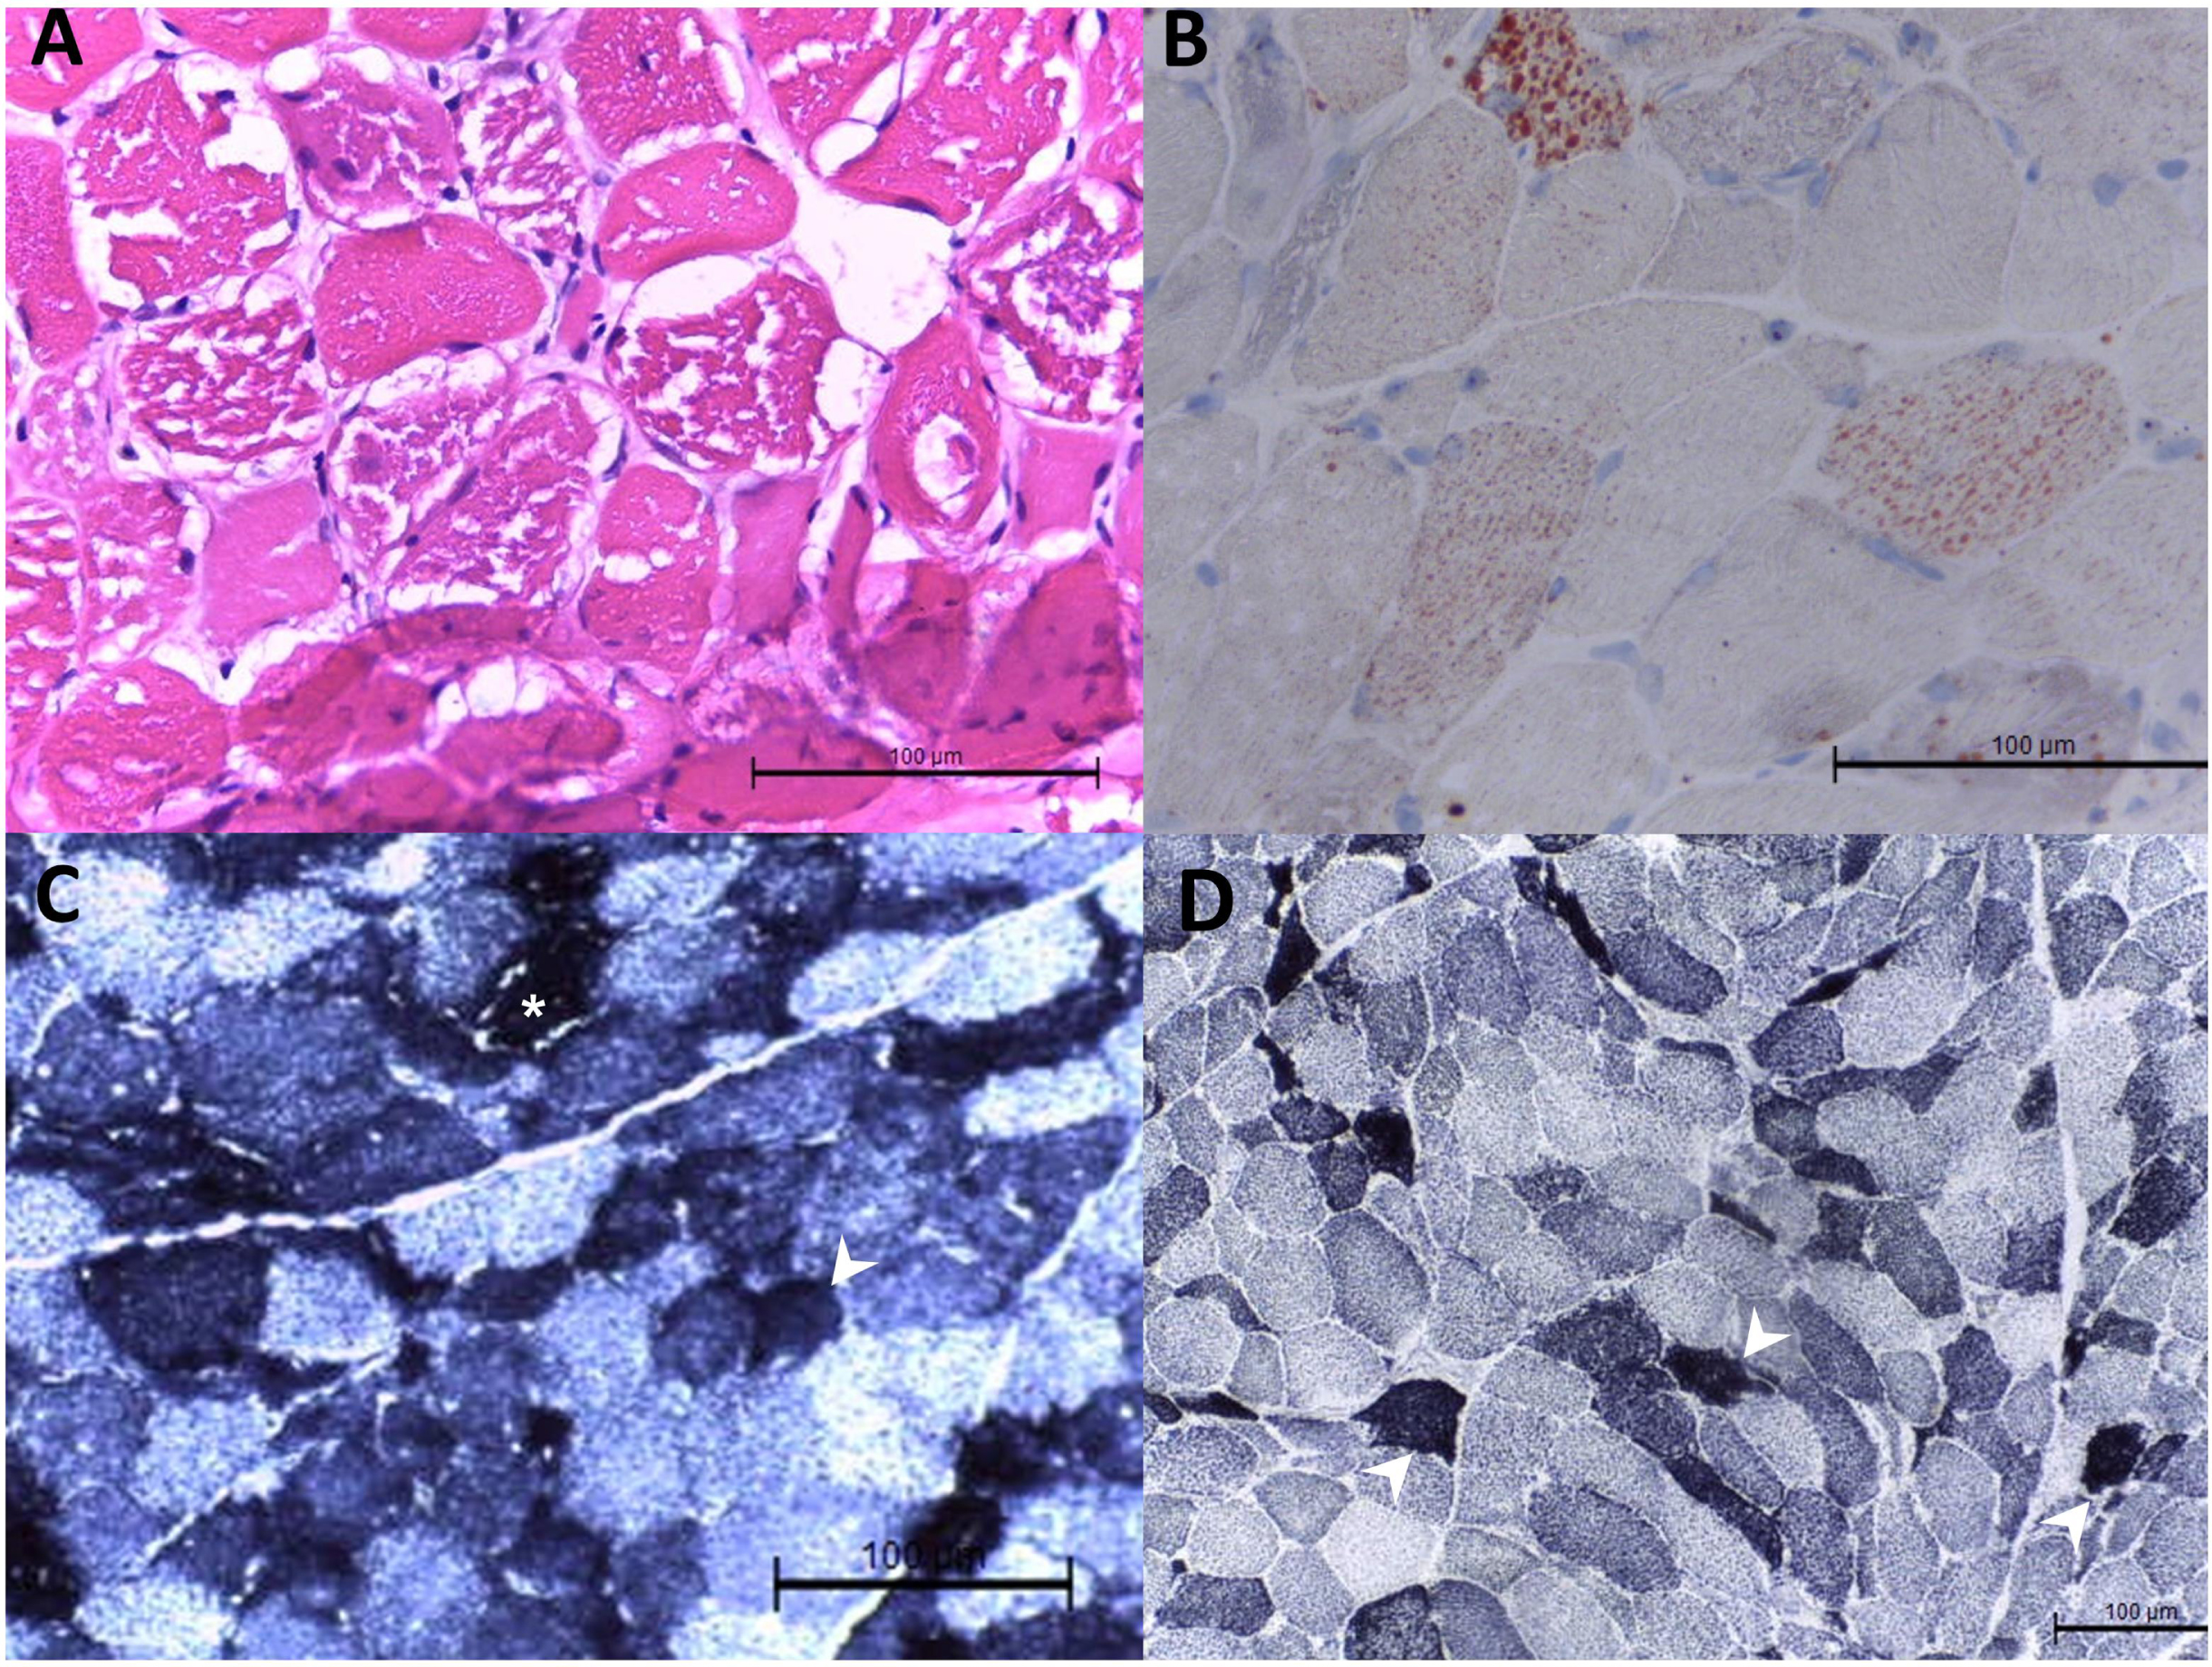 Muscle histopathology in patient 29 with mitochondrial myopathy. Hematoxylin and eosin staining showed variated muscle fiber sizes, degenerative and atrophic muscle fiber sizes, and nuclear internalization in the biopsy at the left biceps brachii. There were muscle fibers with variated cytoplasmic vacuoles. The vacuole was strongly positive for Oil Red O staining (B). In the staining of nicotinamide adenine dinucleotide-tetrazolium reductase (NADH-TR) (C) and succinate dehydrogenase (D), dark staining was noted in some muscle fibers (arrowhead). Vacuoles were also seen in the NADH-TR staining ( *).